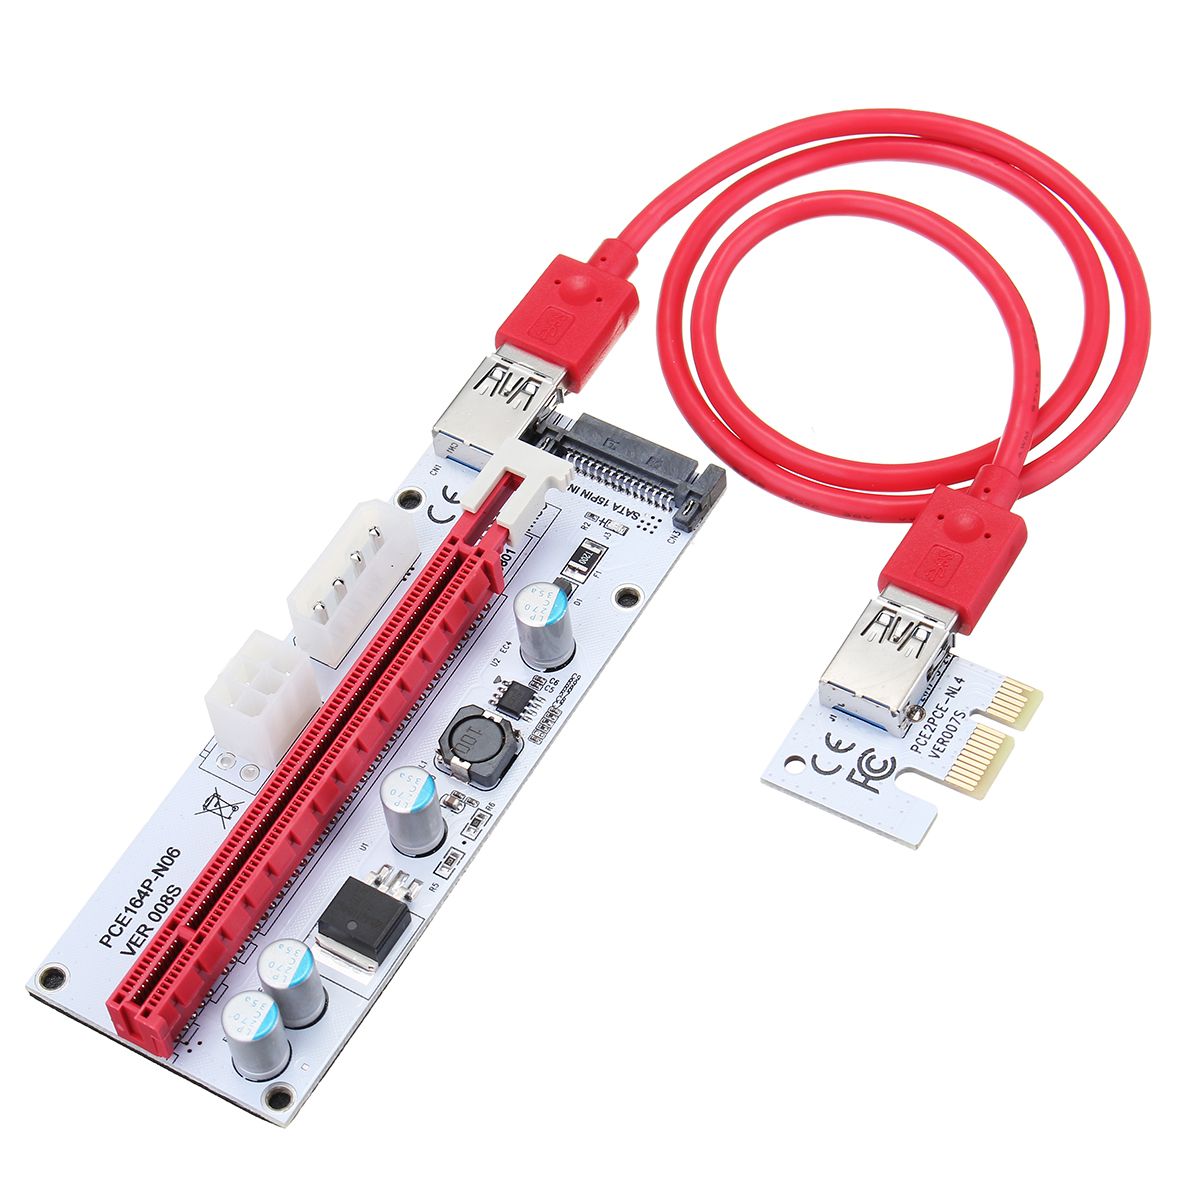 VER-008S-USB30-PCI-E-Express-1x-to-16x-Extension-Cable-Extender-Riser-Card-For-8-GPU-Graphics-Cards-1236715